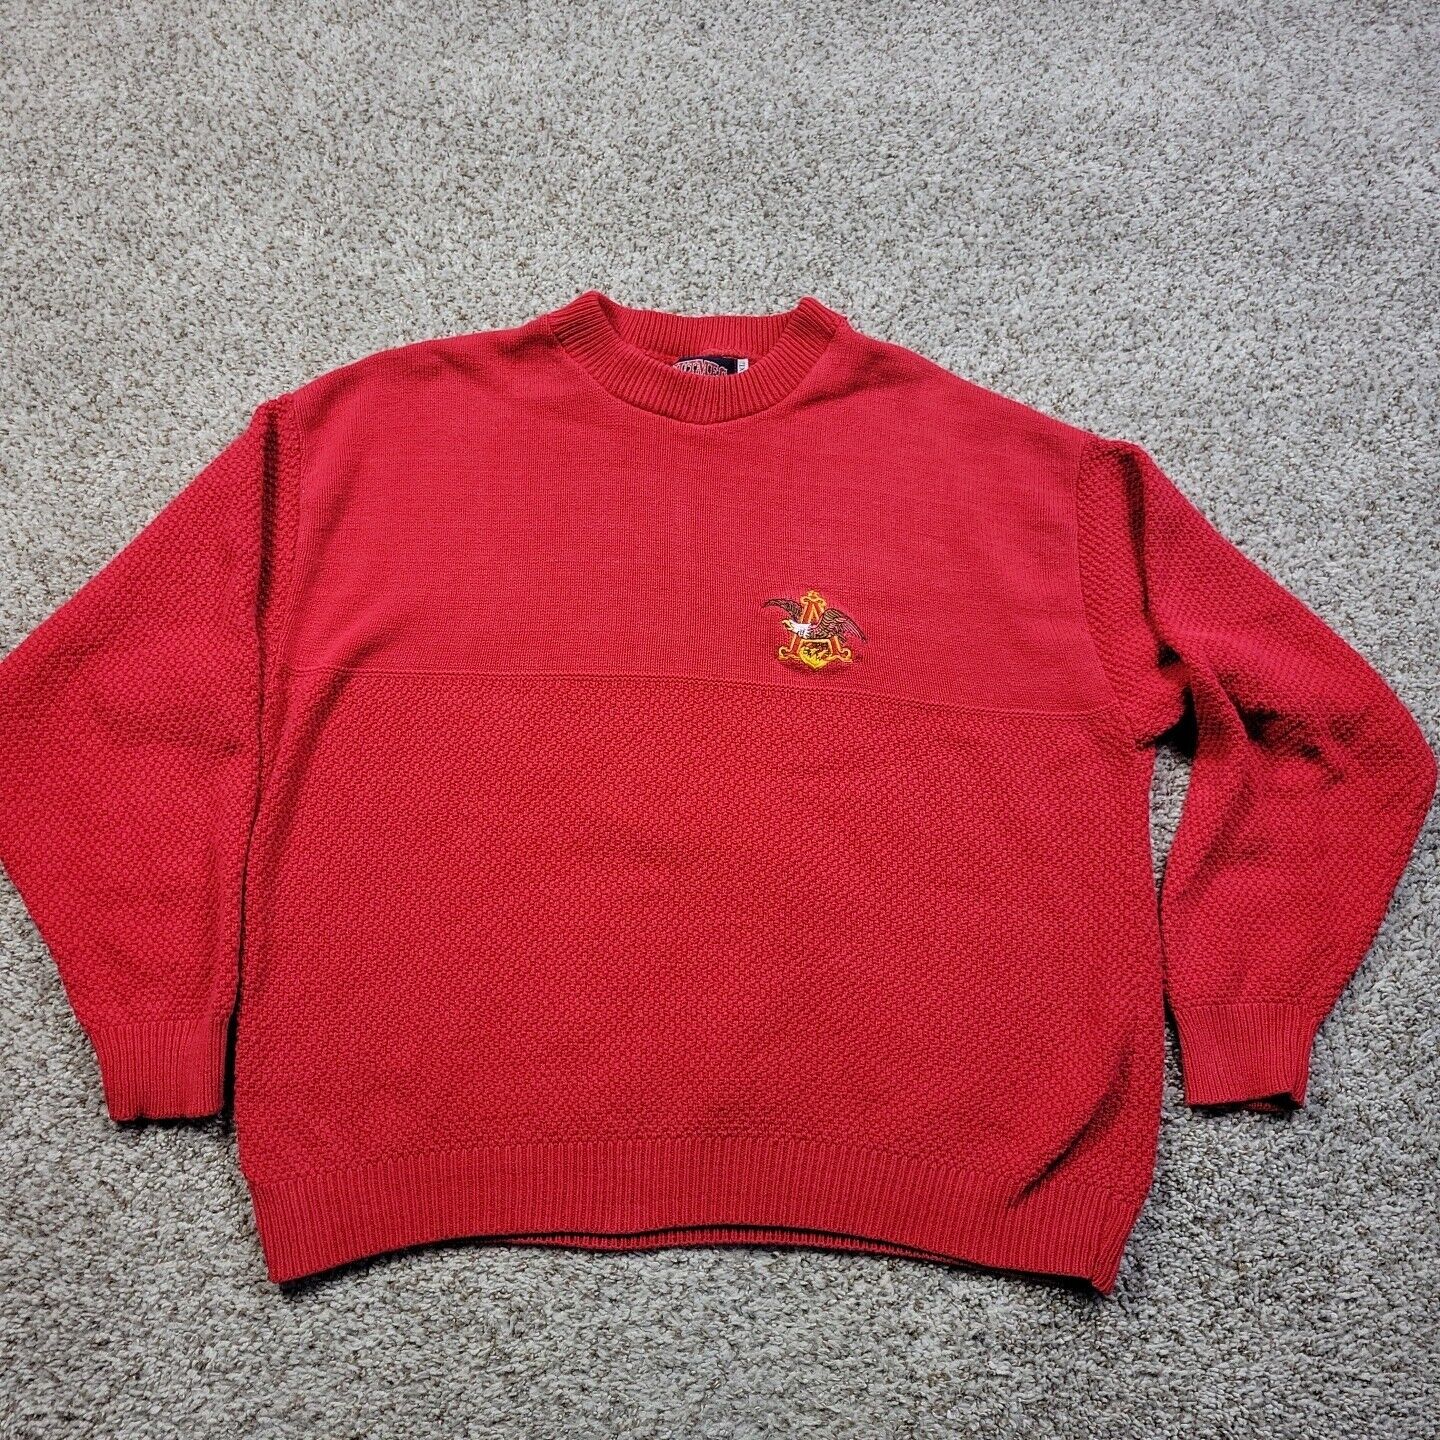 Vintage Anheuser Busch Sweatshirt Mens XL Red Long Sleeve Nutmeg Made In USA